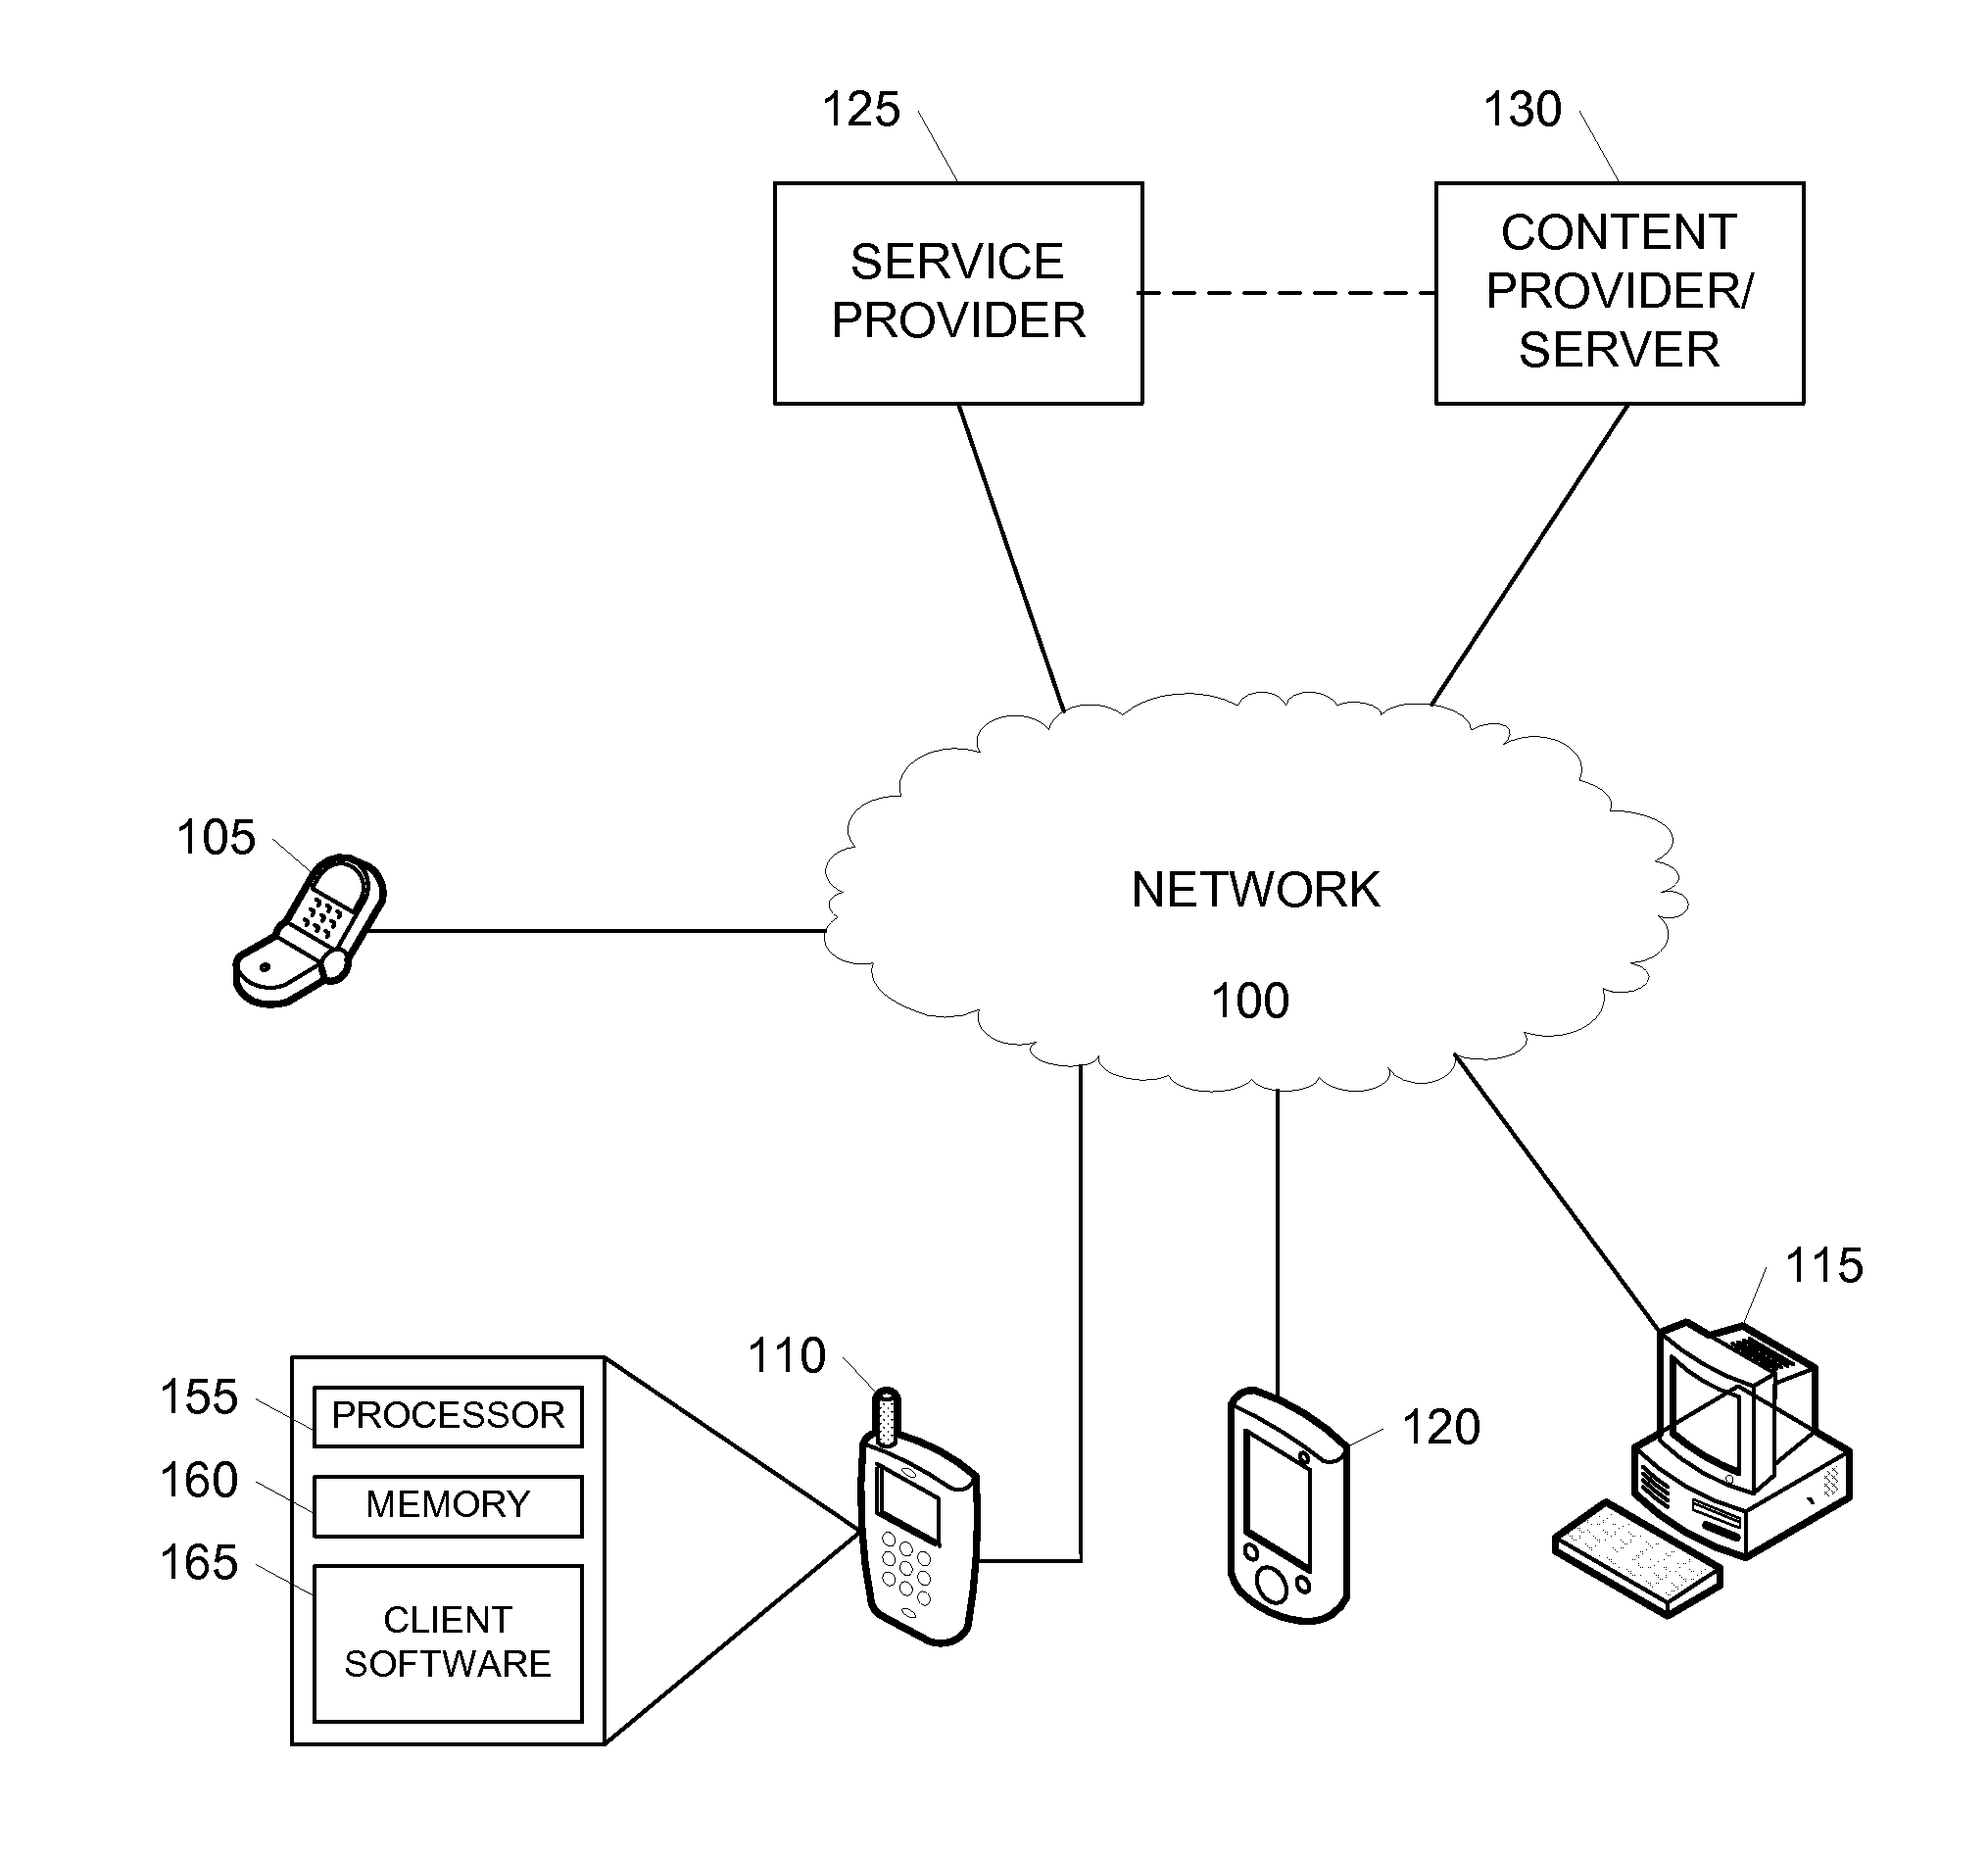 Mapping service components in a broadcast environment